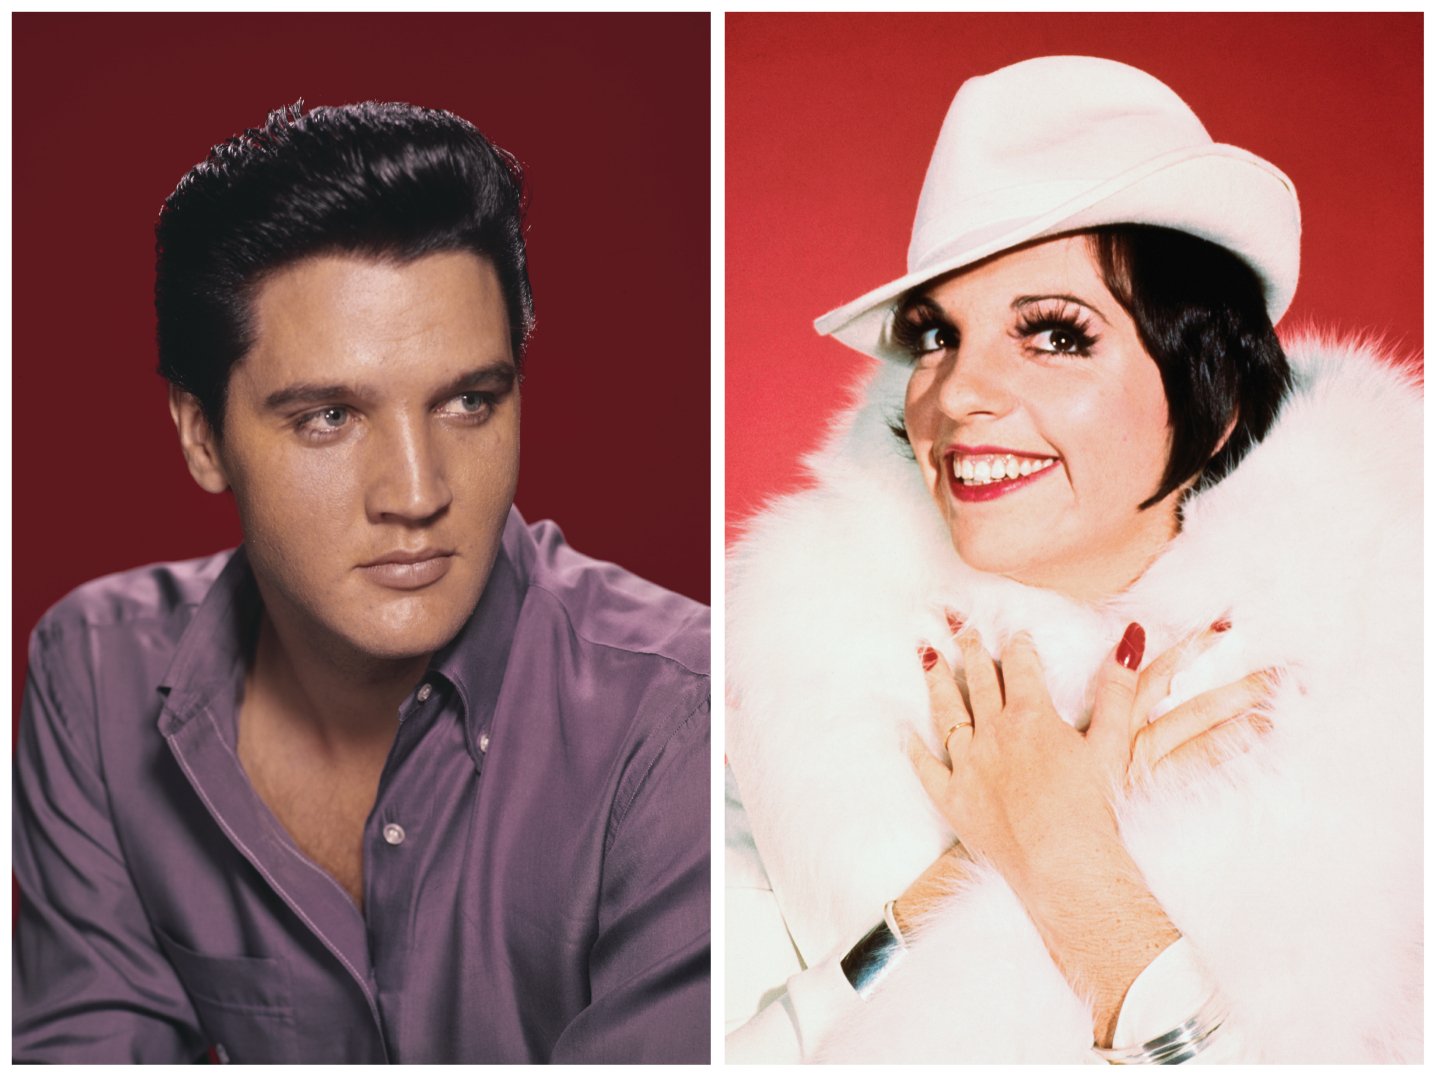 Elvis wears a purple shirt and poses in front of a red background. Liza Minnelli wears a white fur jacket and white hat and poses in front of a red background.